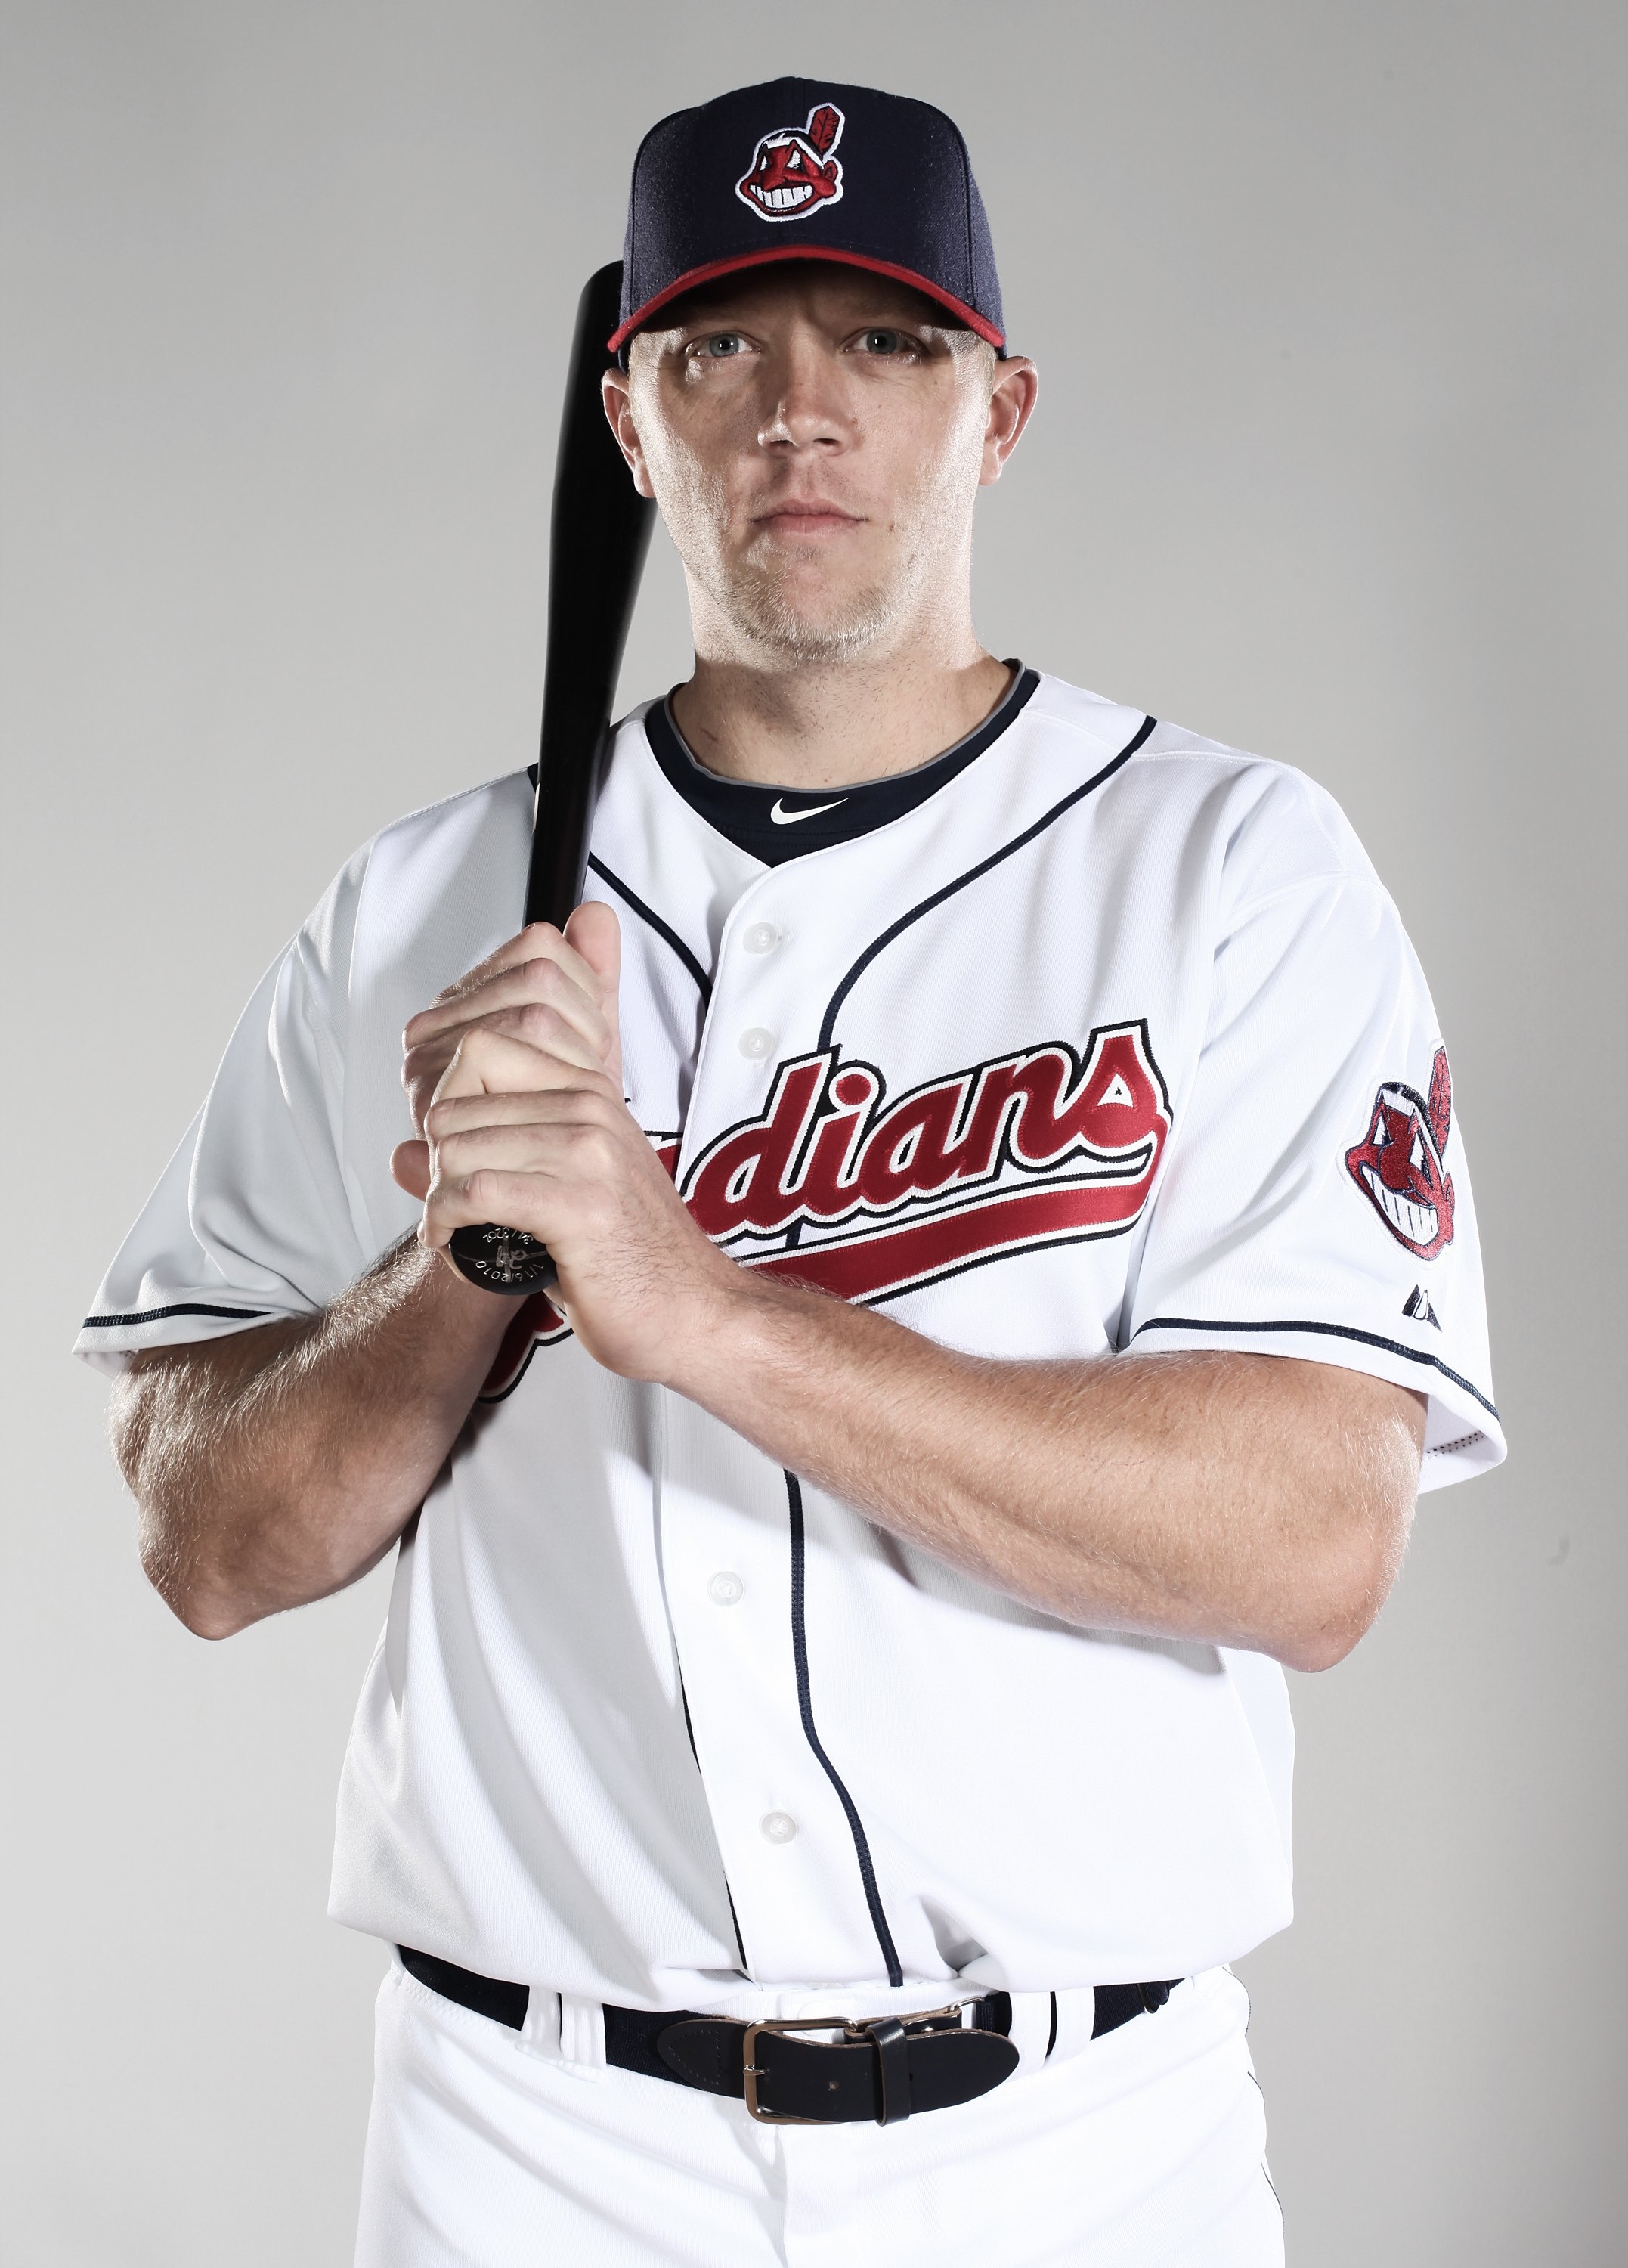 GOODYEAR, AZ - FEBRUARY 28:  (EDITORS NOTE: This images was digitally desaturated.) Shelley Duncan #47 #76 poses for a portrait during the Cleveland Indians Photo Day at the training complex at Goodyear Stadium on February 28, 2010 in Goodyear, Arizona.